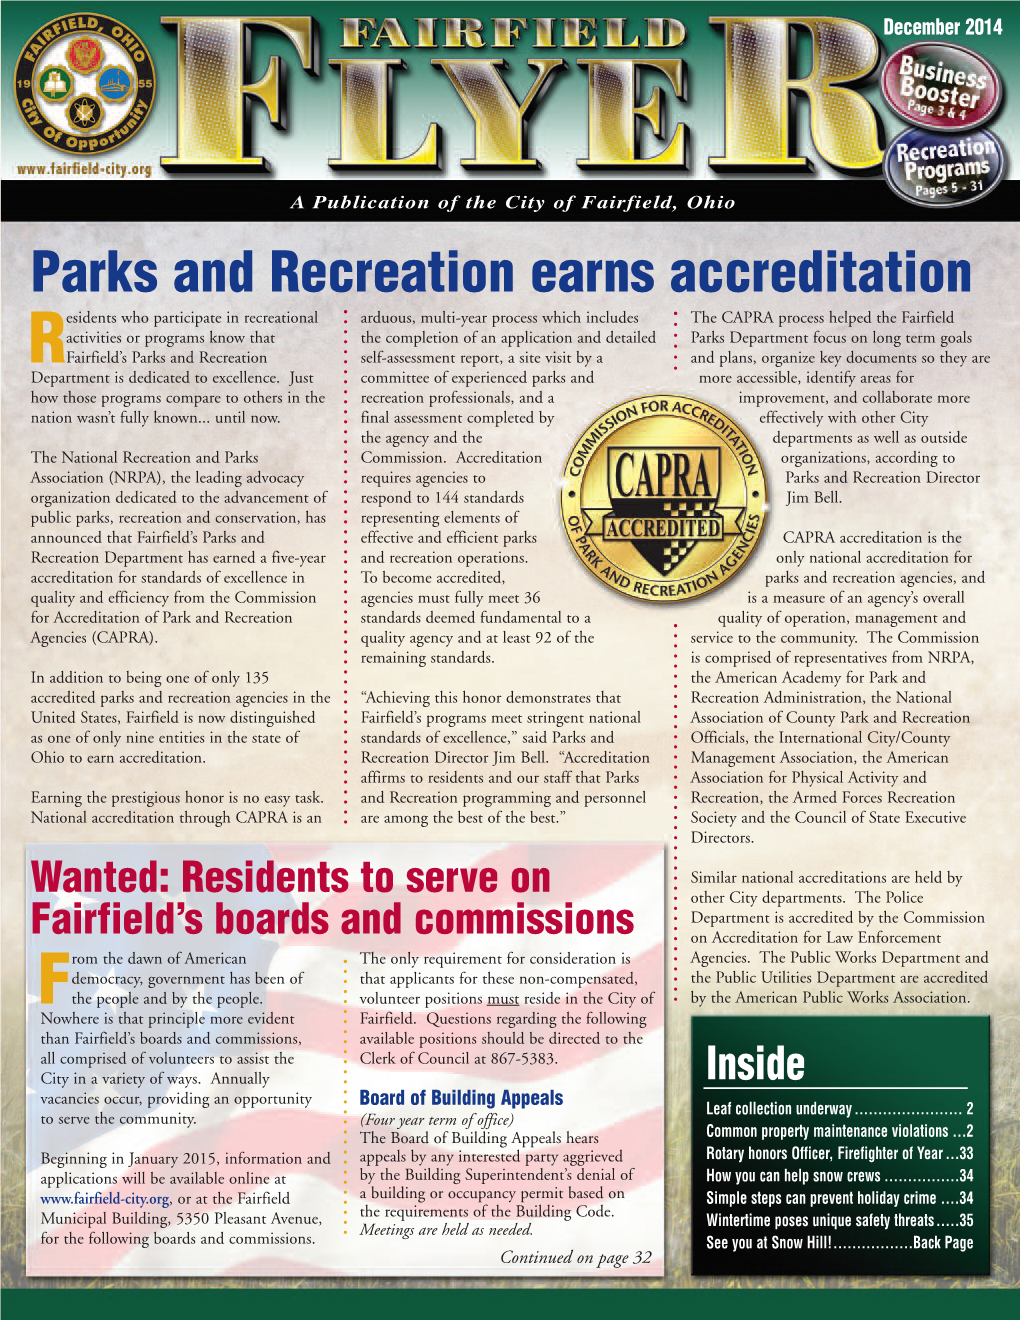 Parks and Recreation Earns Accreditation